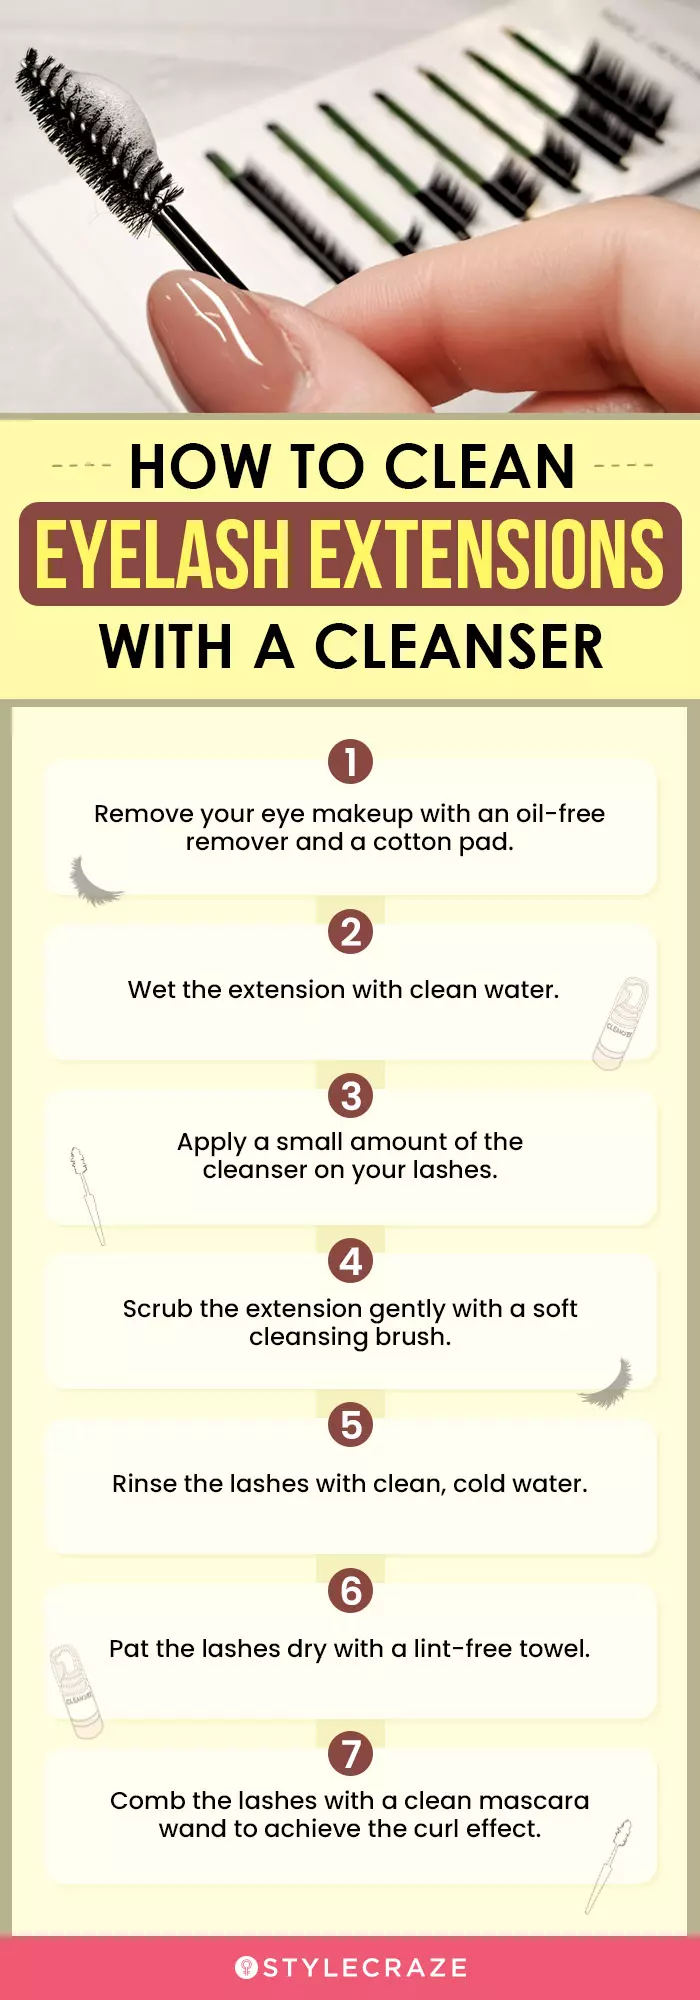 How To Clean Eyelash Extensions With A Cleanser (infographic)